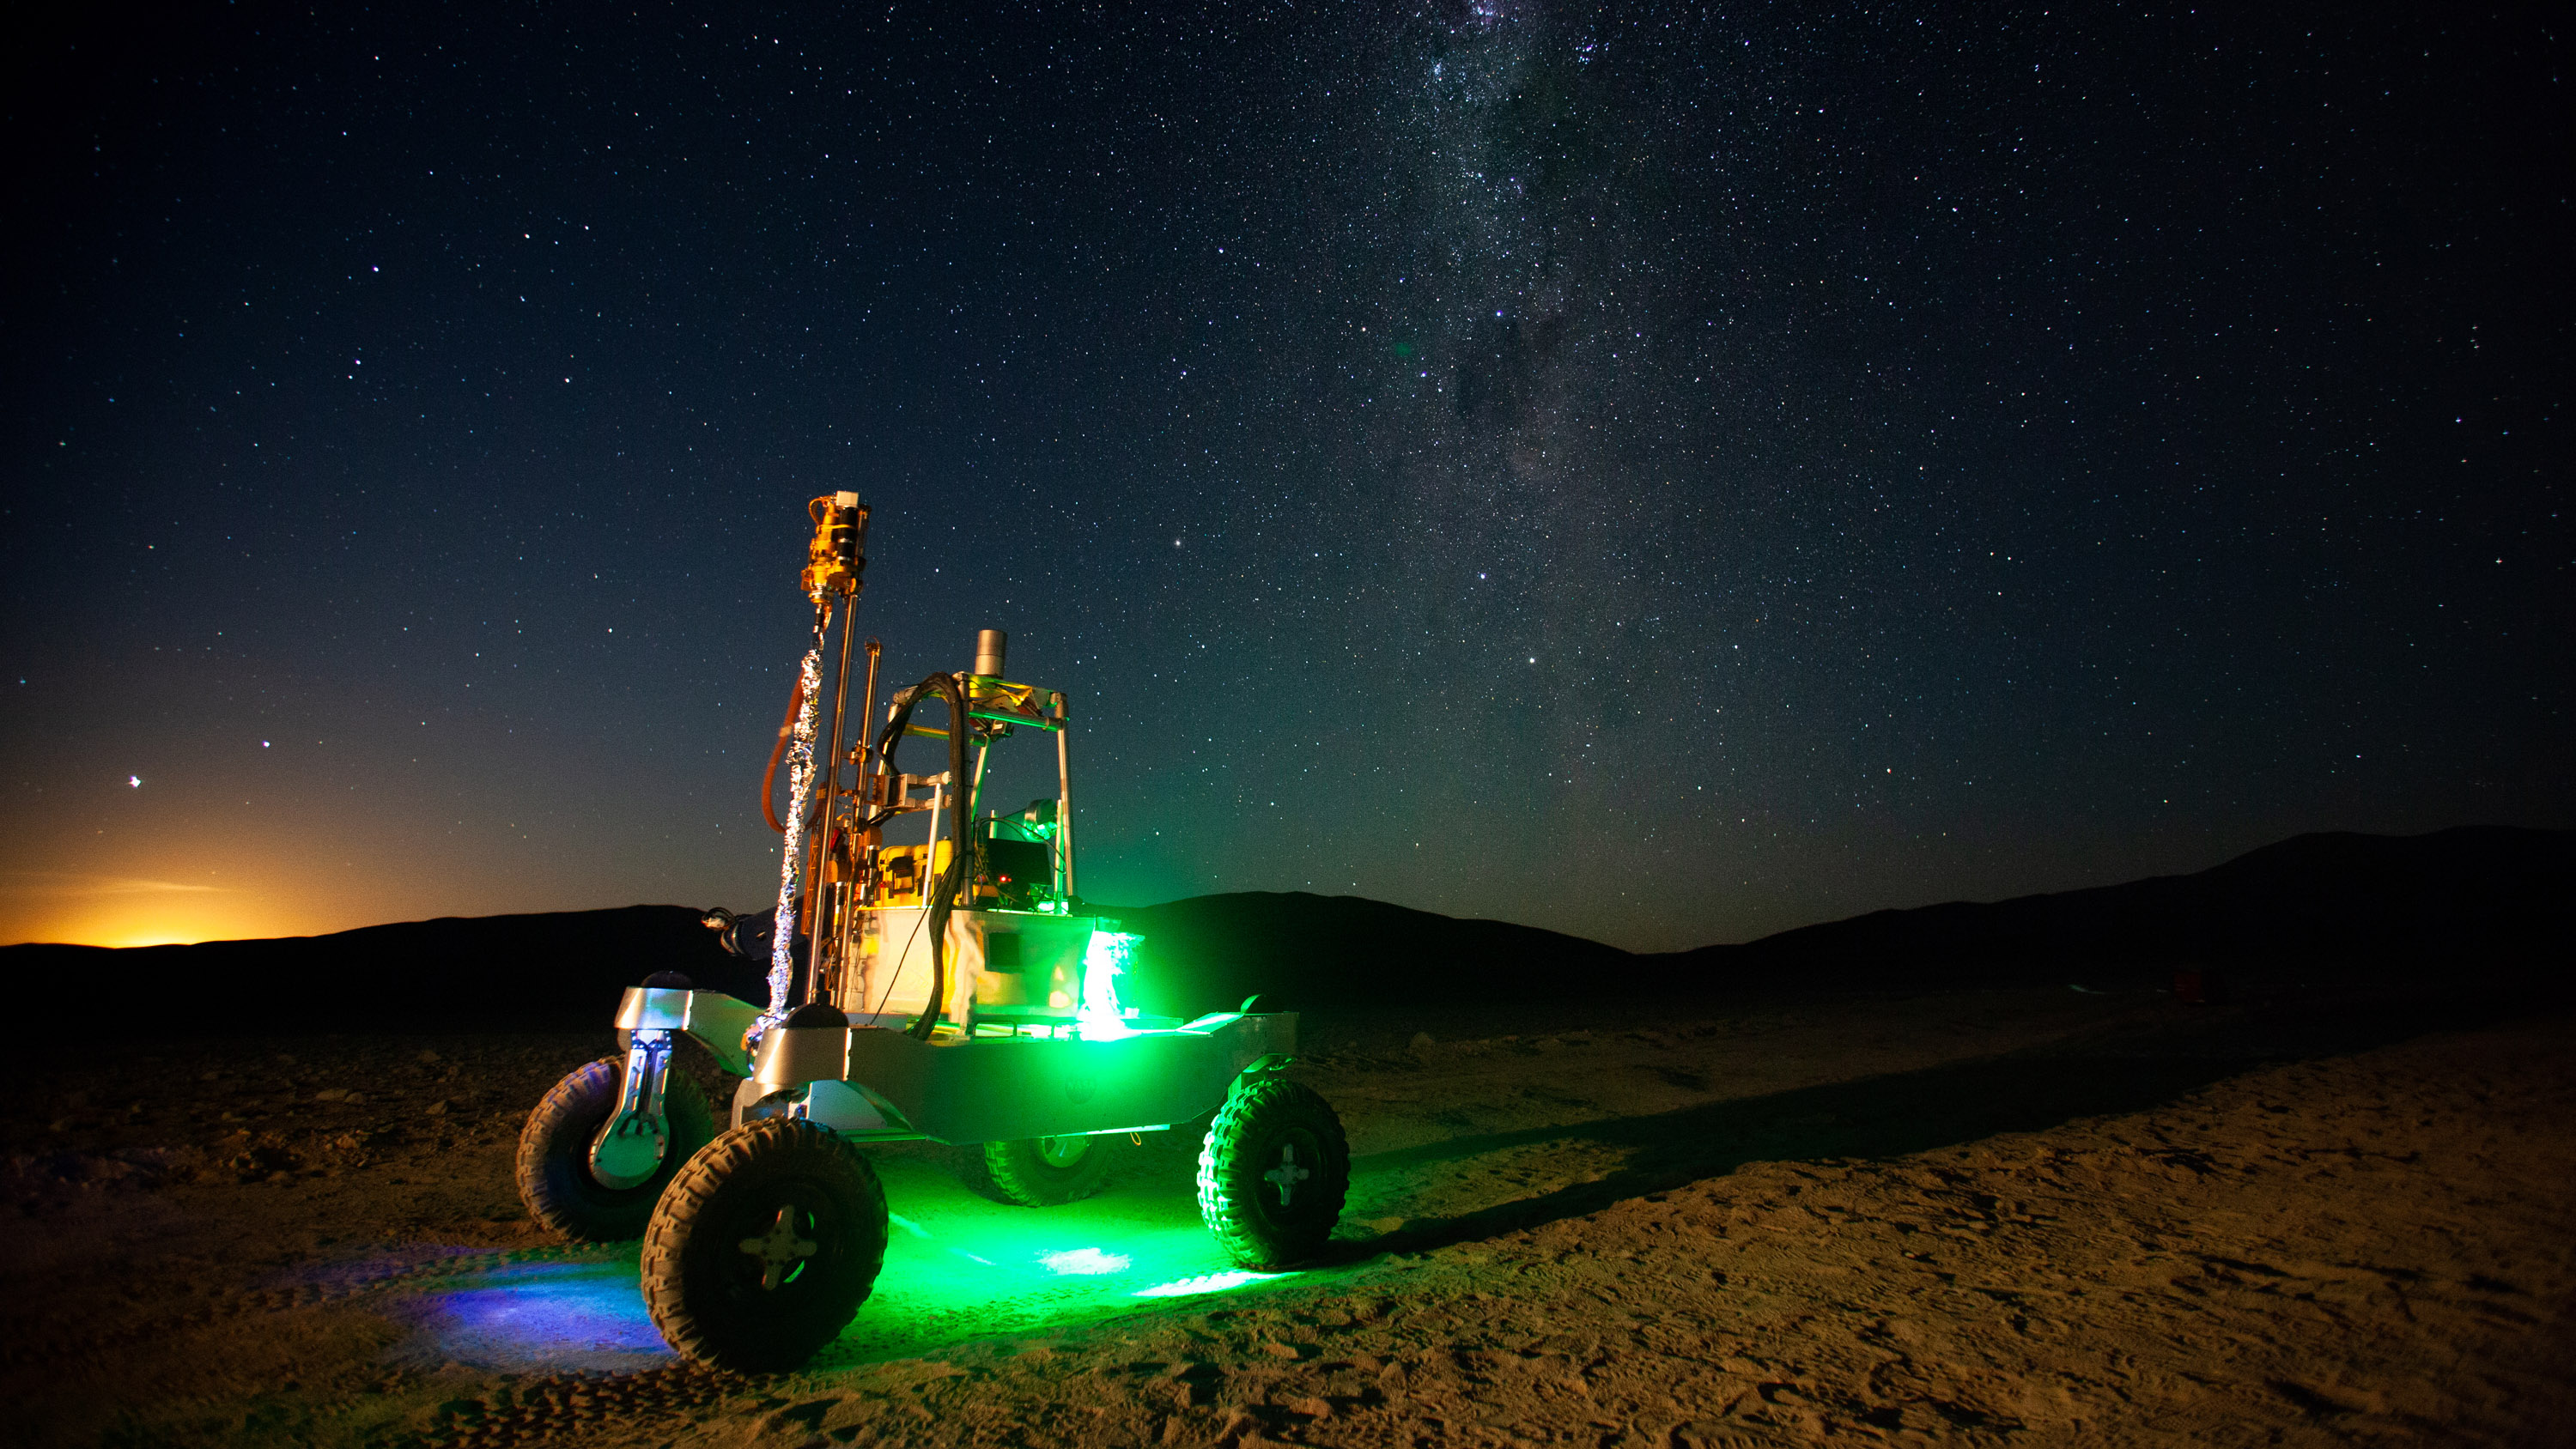 ARADS rover glowing with green light in under a starry sky